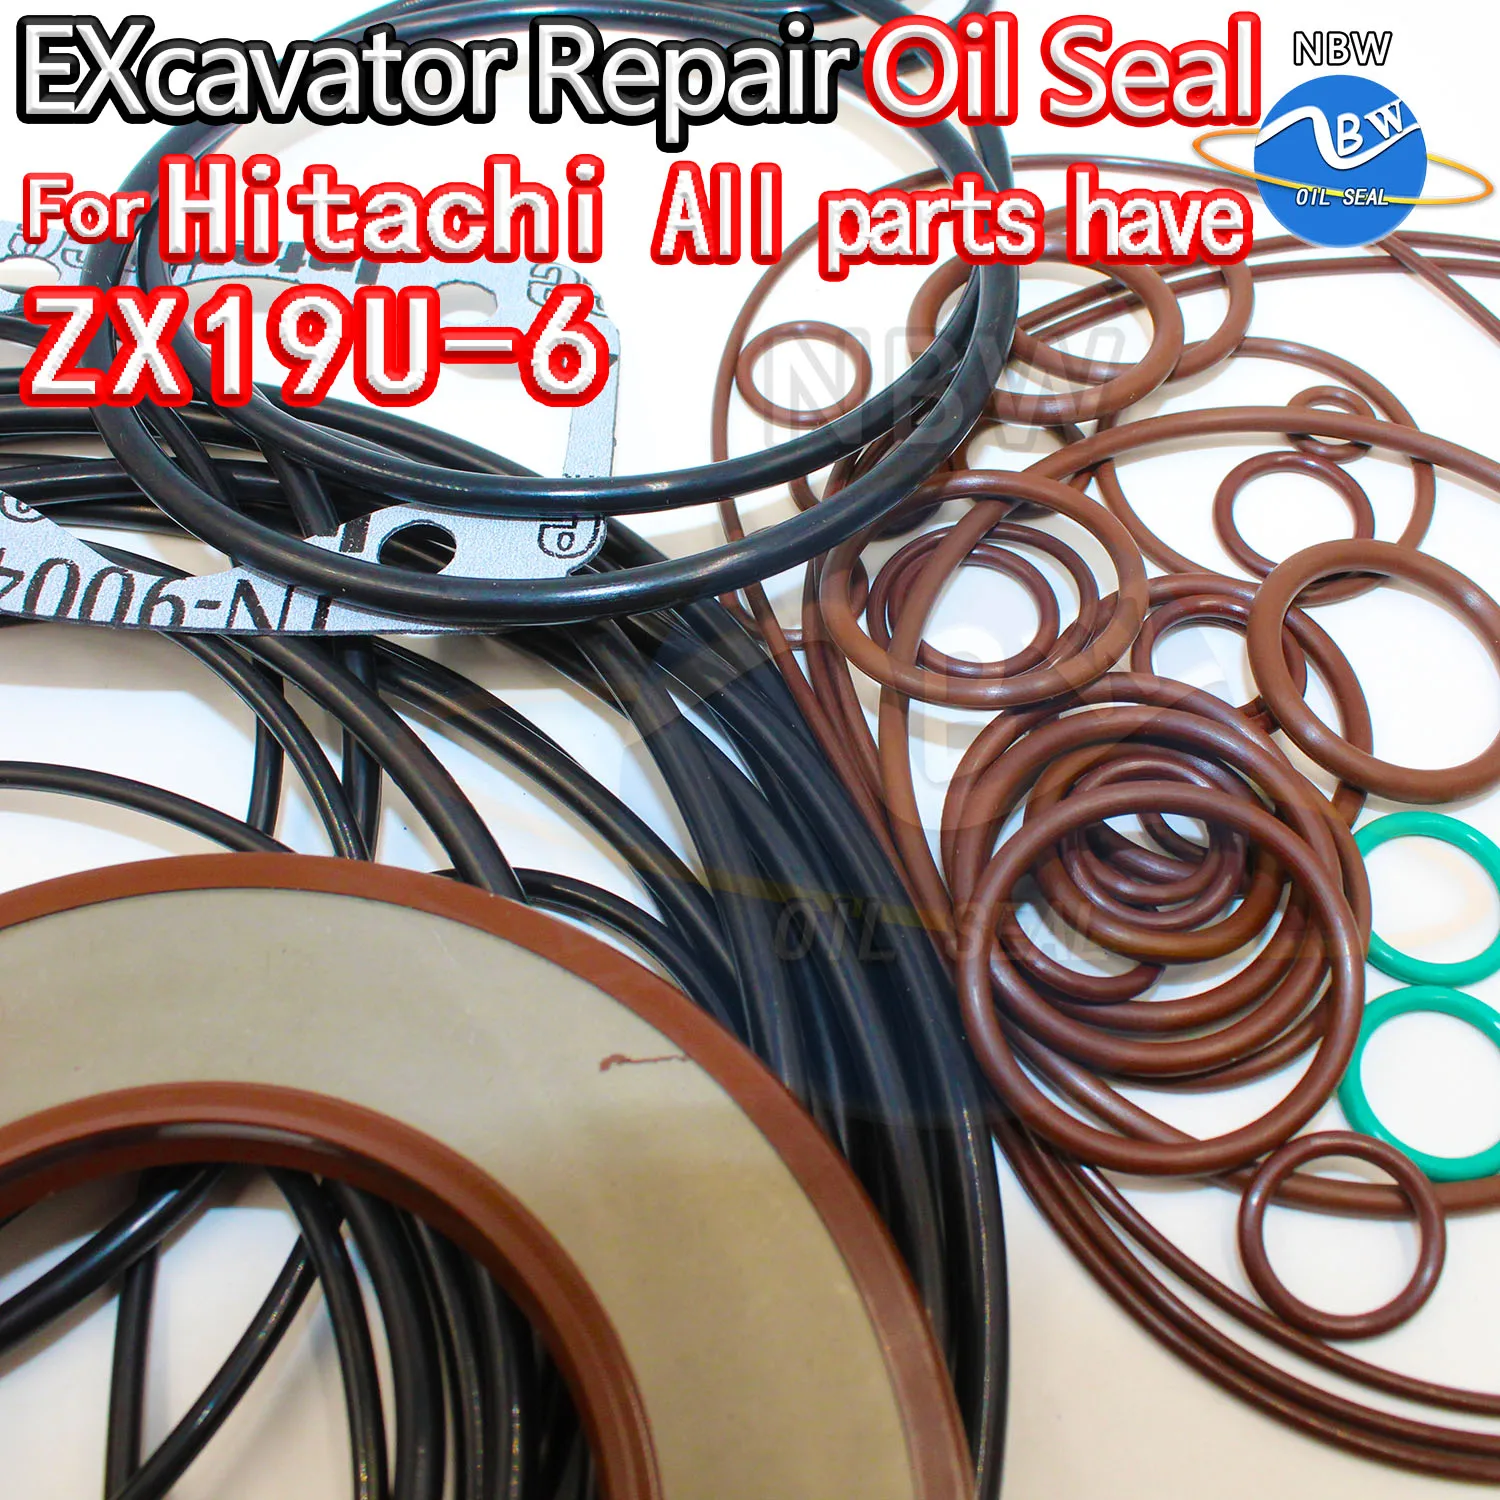 

For HITACHI ZX19U-6 Excavator Oil Seal Kit High Quality Repair Hit ZX19U 6 Adjust Swing Gear Center Joint Gasket Nitrile NBR